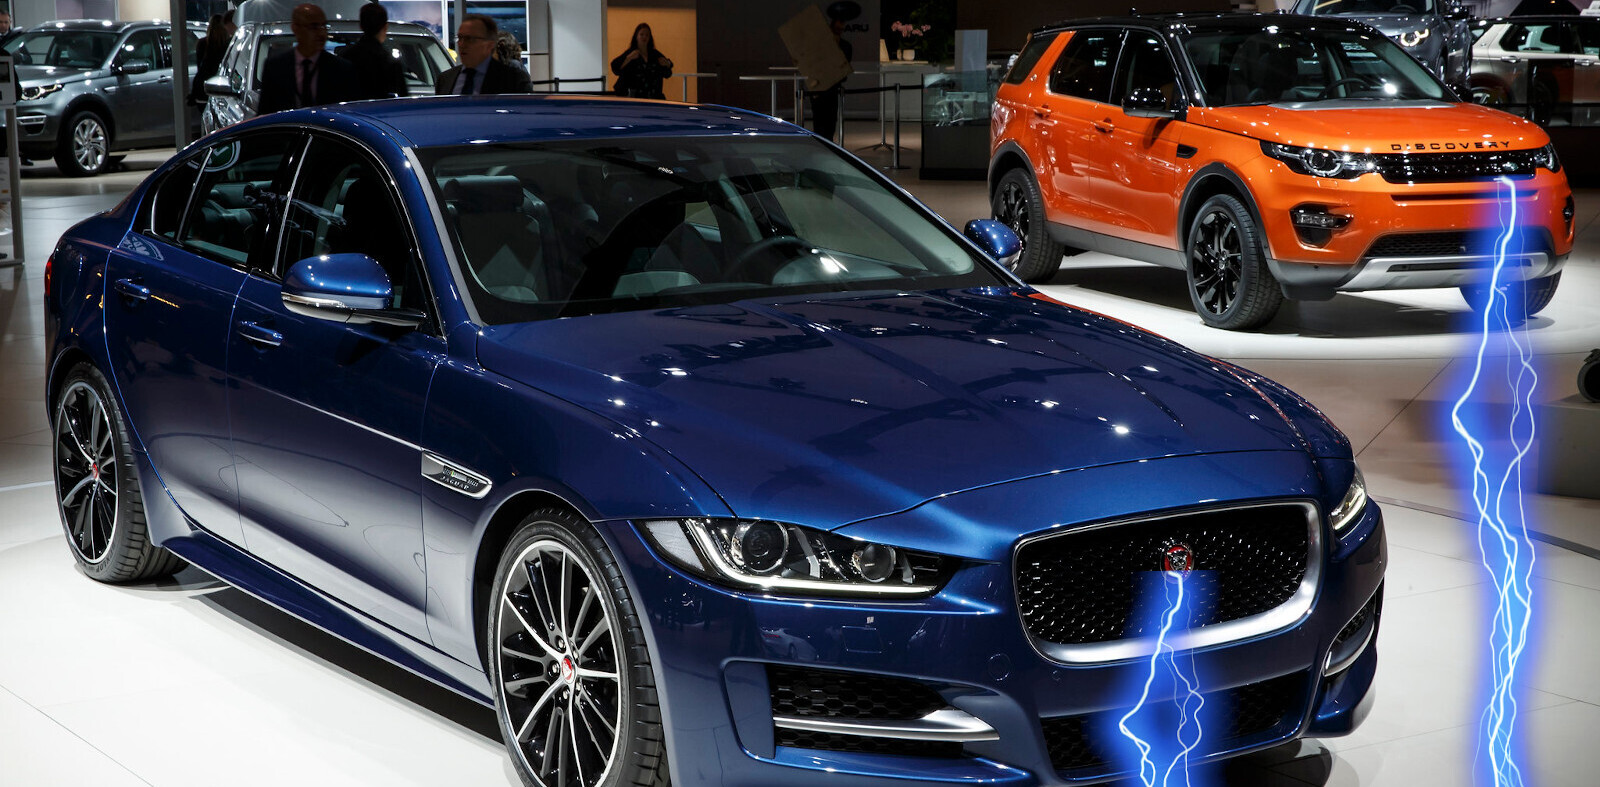 Breaking: Jaguar Land Rover is going all-electric from 2025